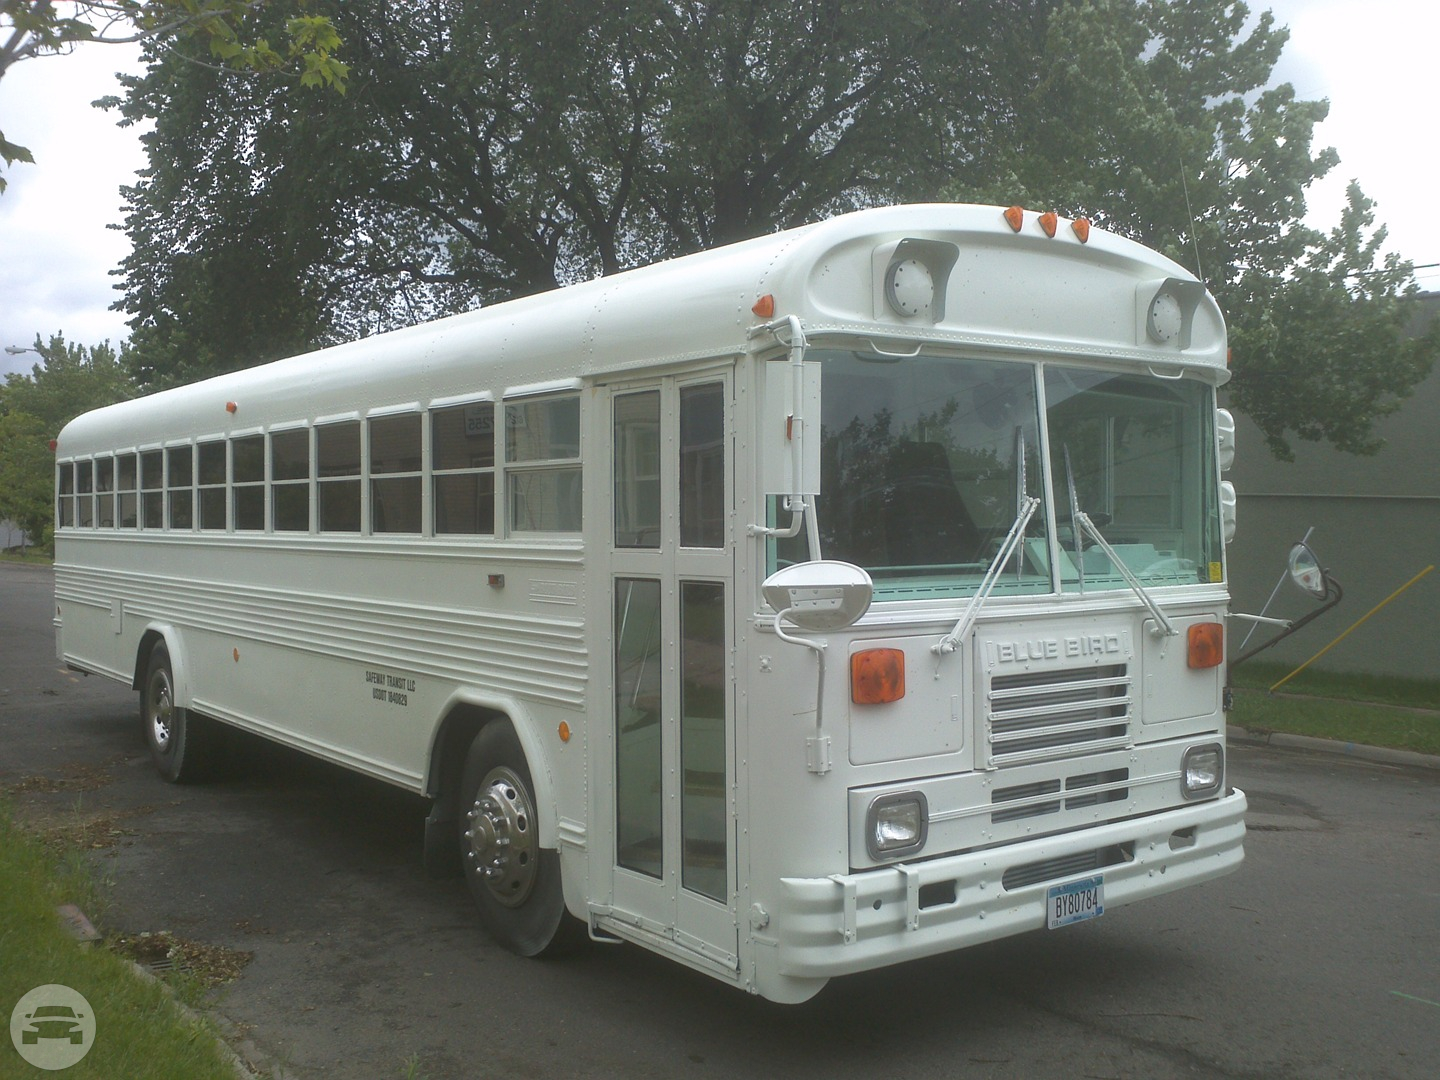 THE WHITE KNIGHT LIMO BUS
Party Limo Bus /
Minneapolis, MN

 / Hourly $0.00
